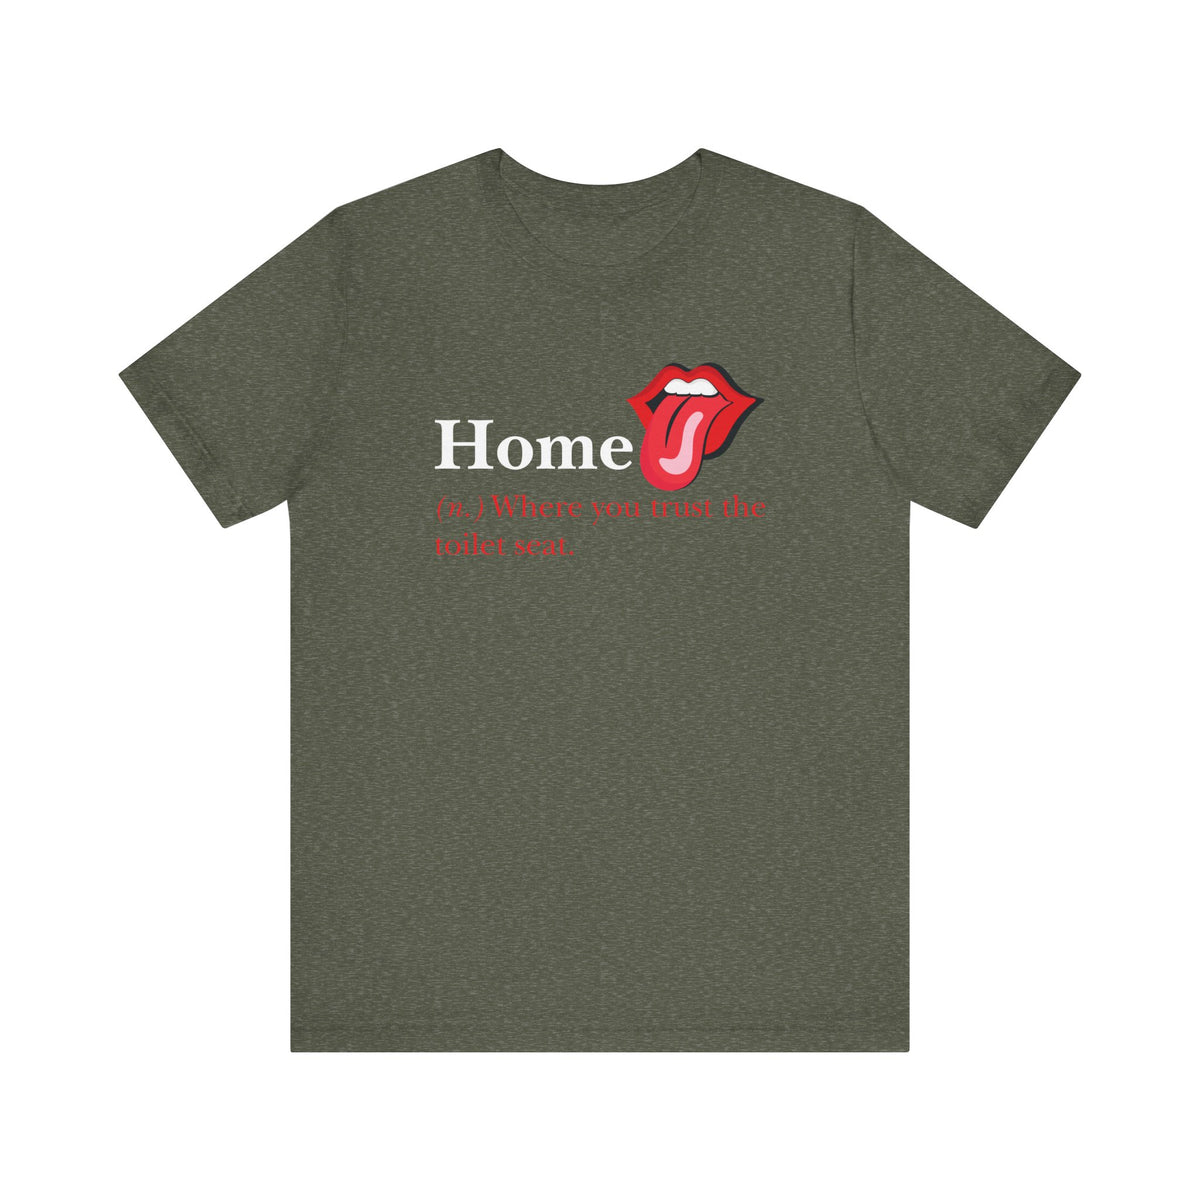 Home: Where You Trust the Toilet Tee, Tongue Edition - Tee - Twisted Jezebel